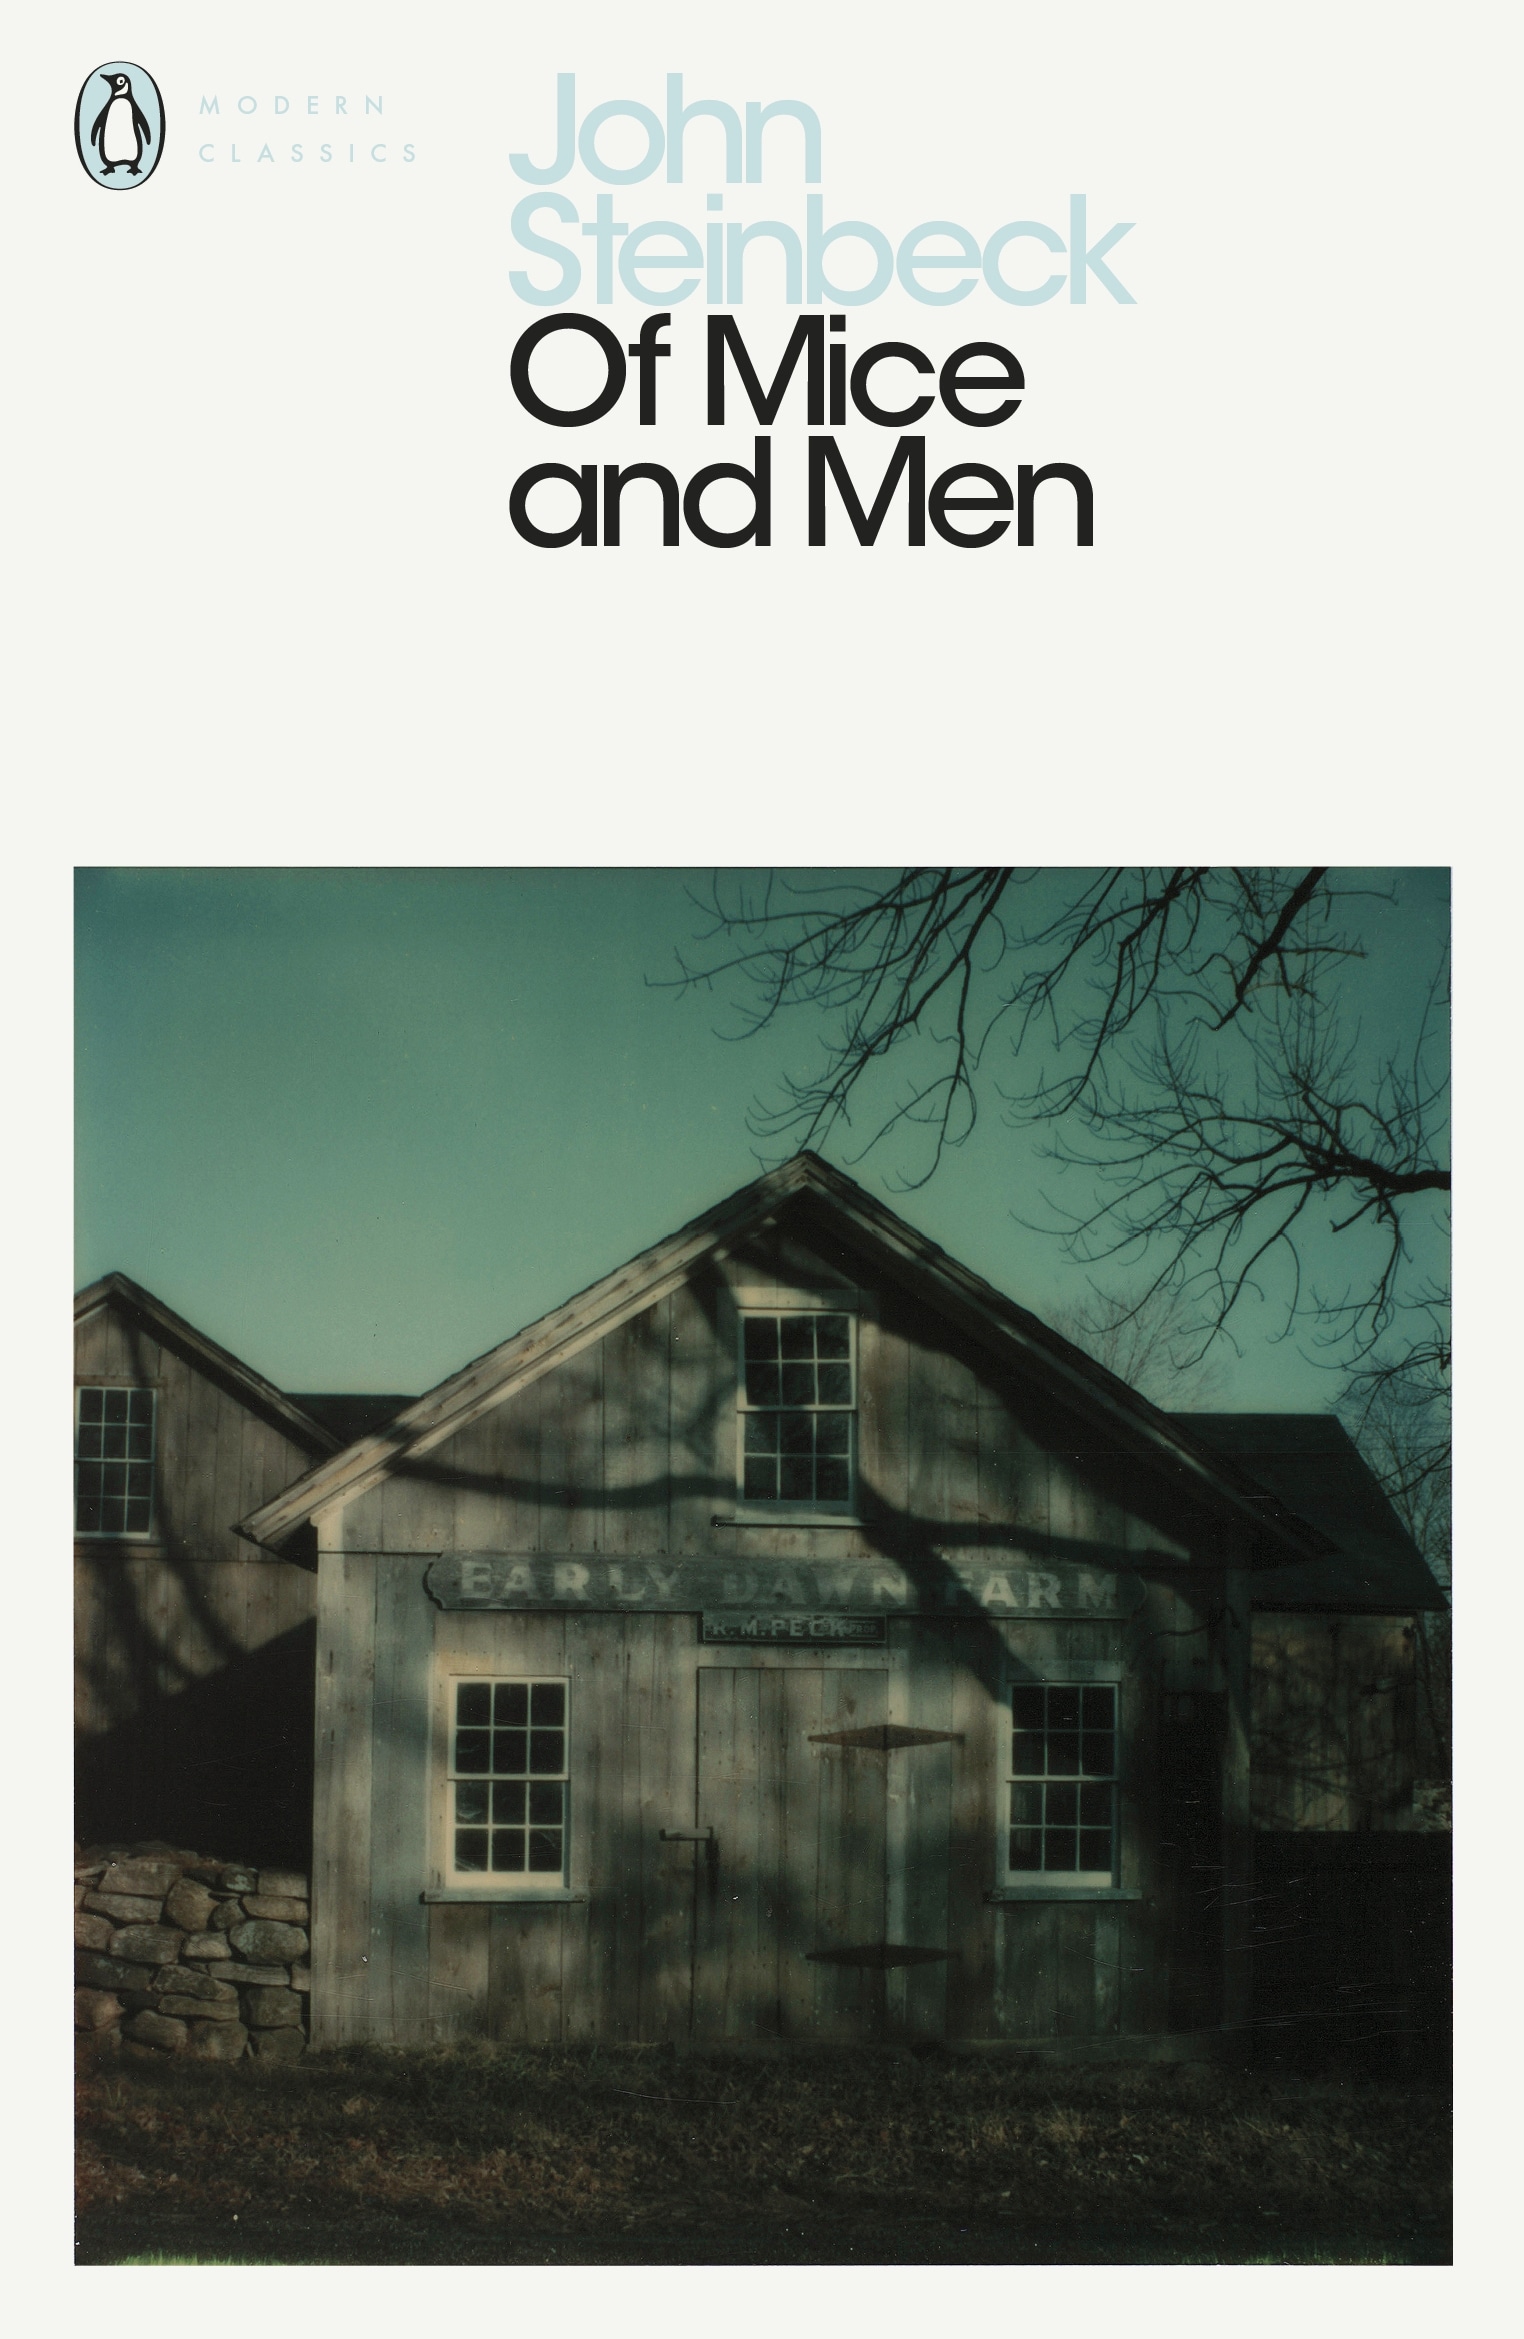 Book “Of Mice and Men” by John Steinbeck, Susan Shillinglaw — September 7, 2000